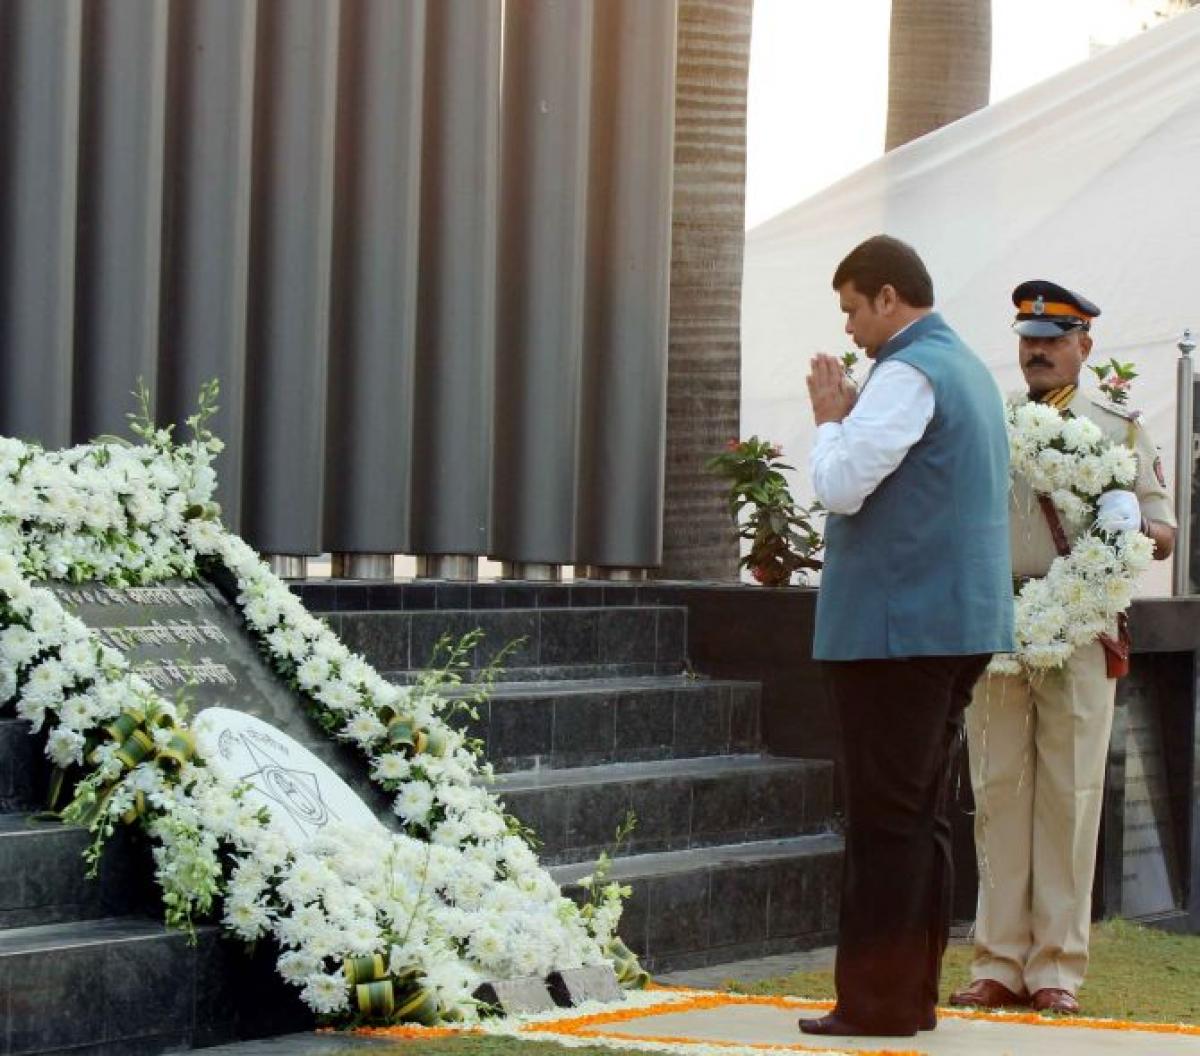 Tributes paid to martyrs on 26/11 Mumbai attack anniversary